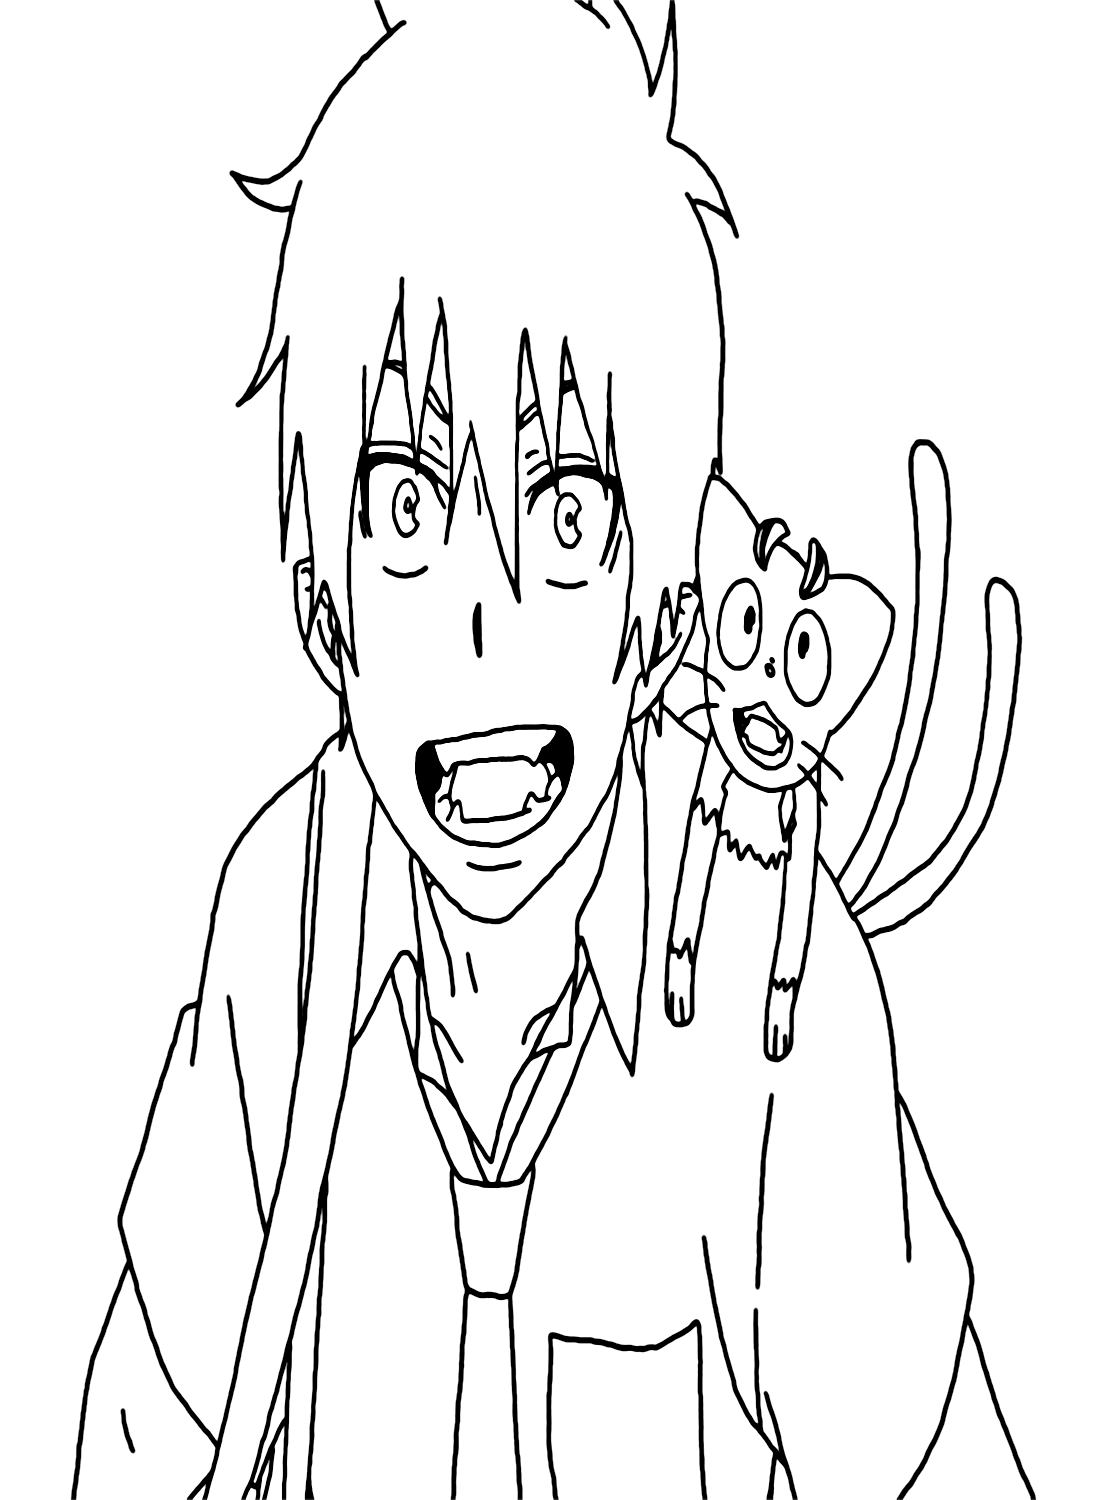 Rin Okumura with Kuro Coloring Pages from Anime